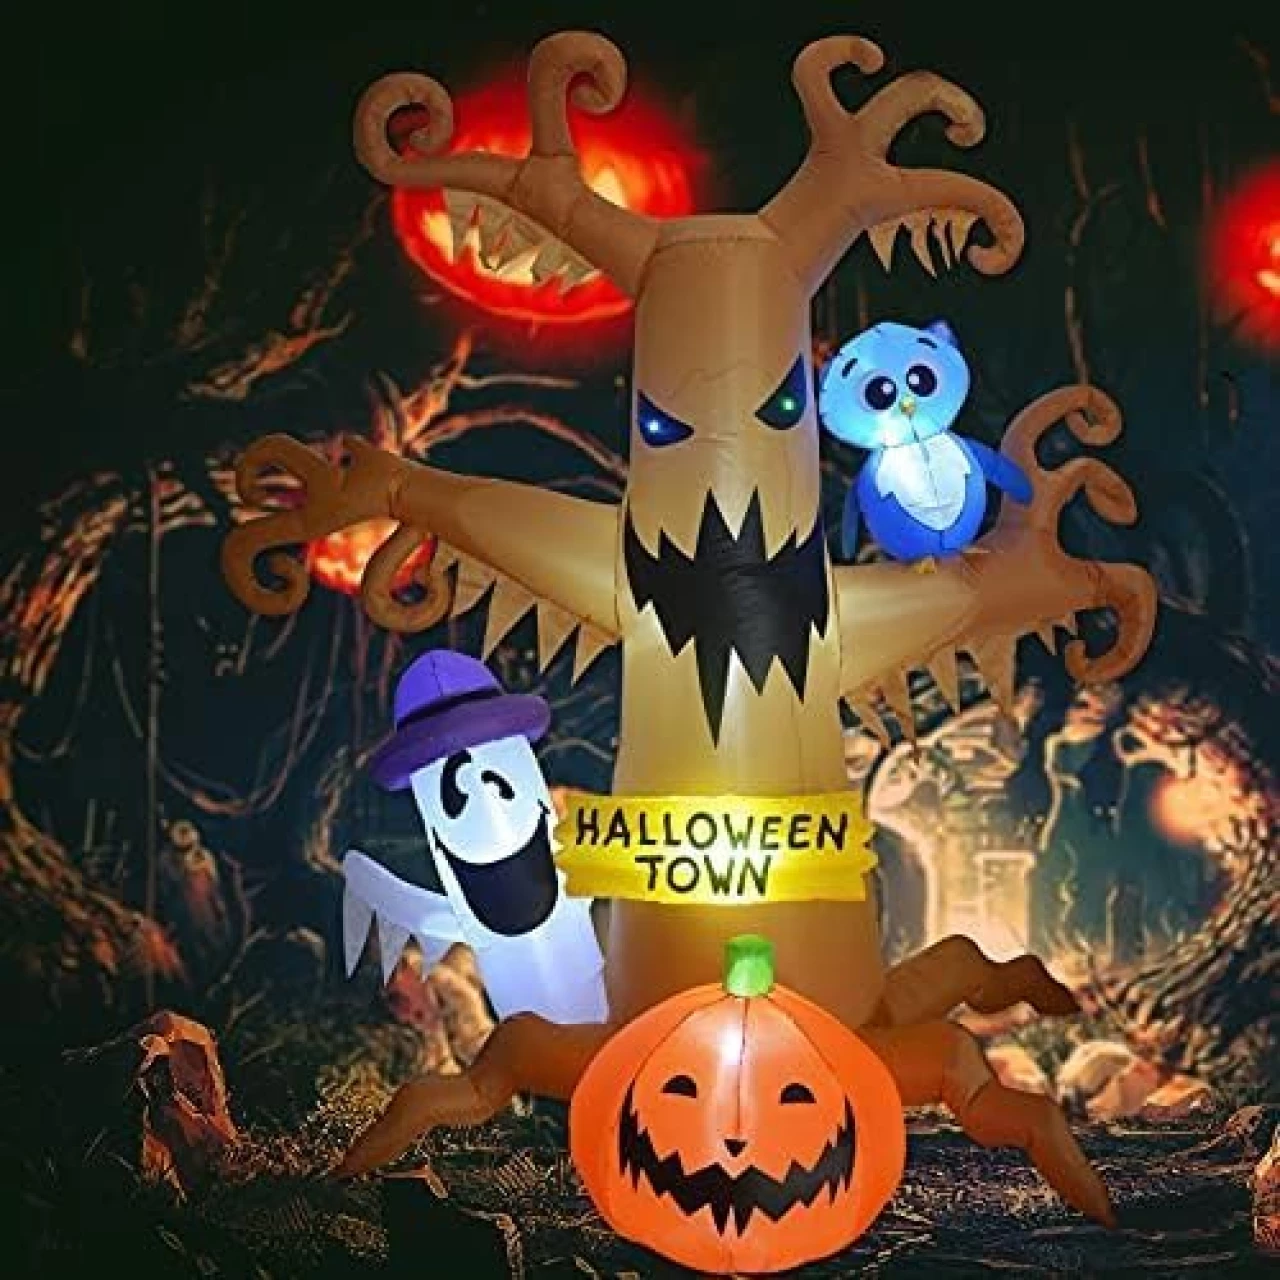 GOOSH 8 FT Halloween Inflatables Outdoor Dead Tree with Ghost, Pumpkin and Owl, Blow Up Yard Decoration with LED Lights Built-in for Holiday/Party/Yard/Garden